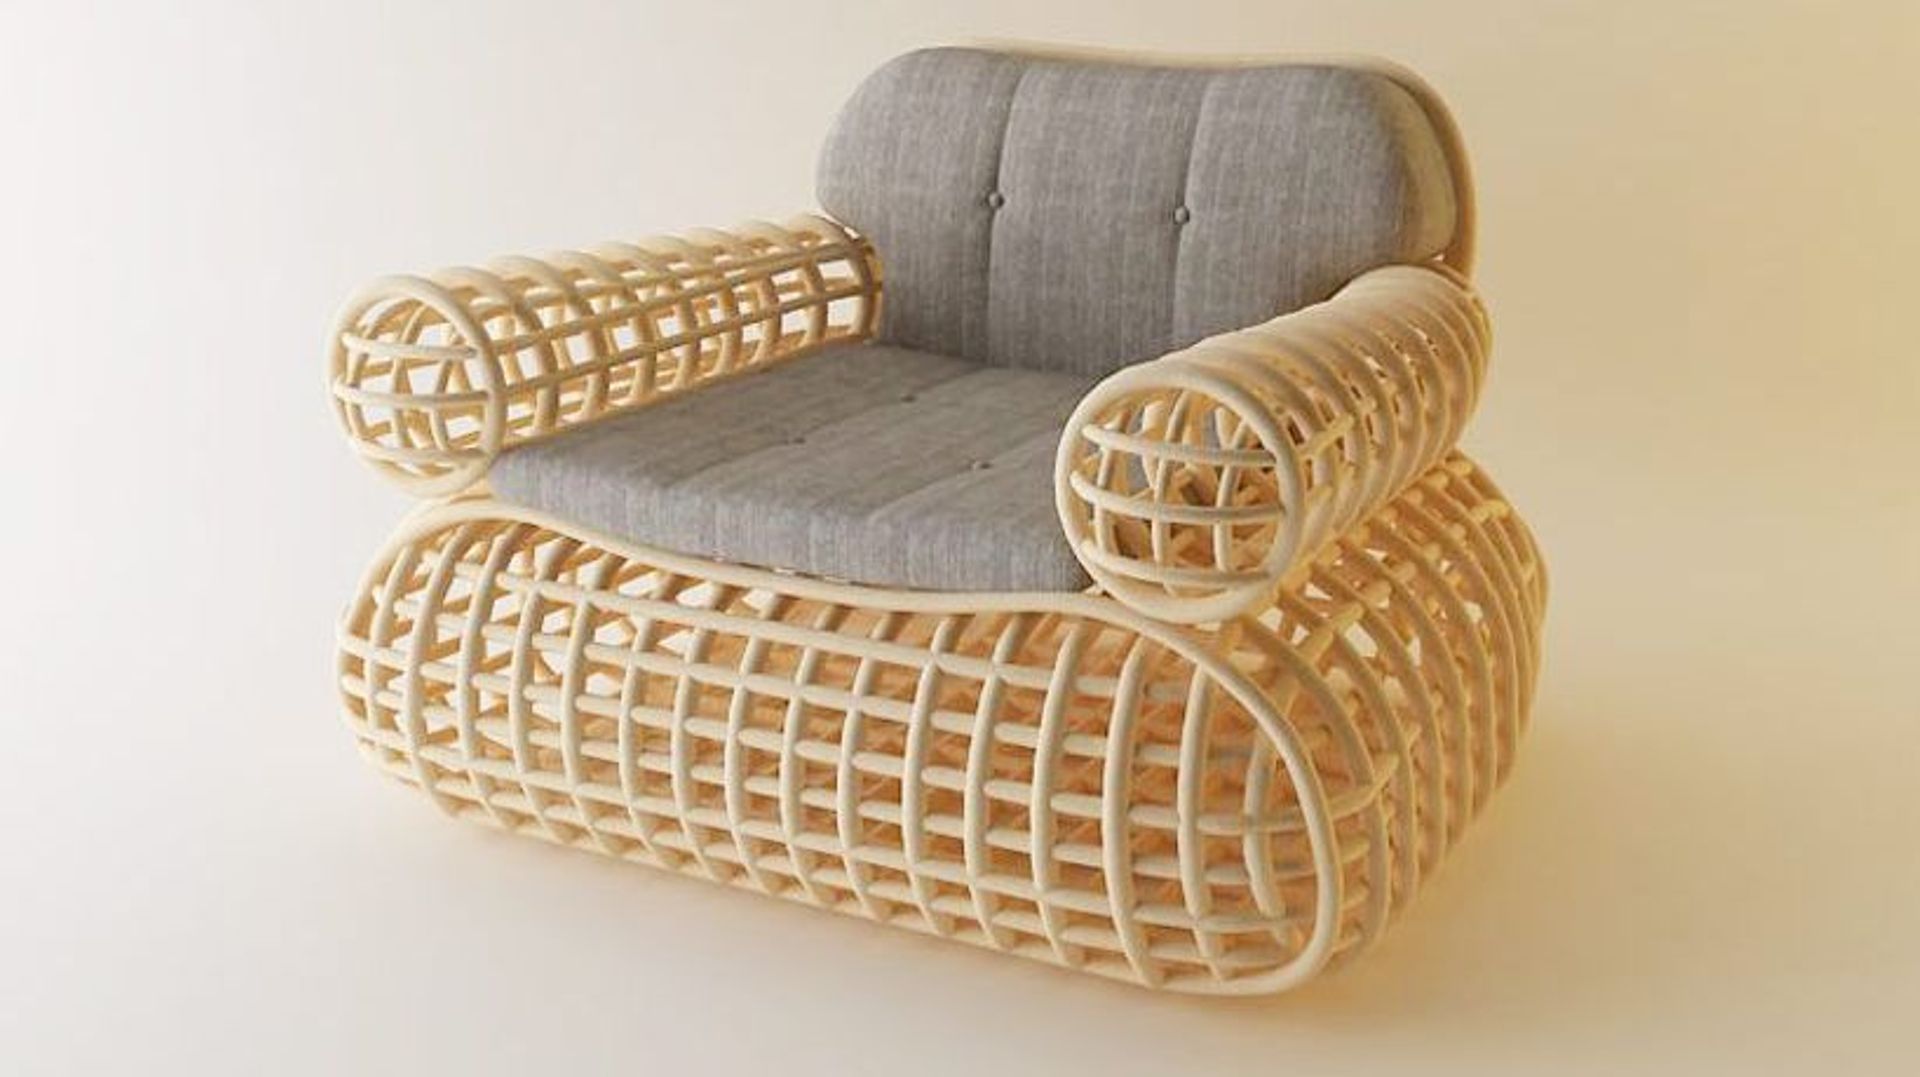 Abie Abdillah is a furniture designer from Jakarta, Indonesia